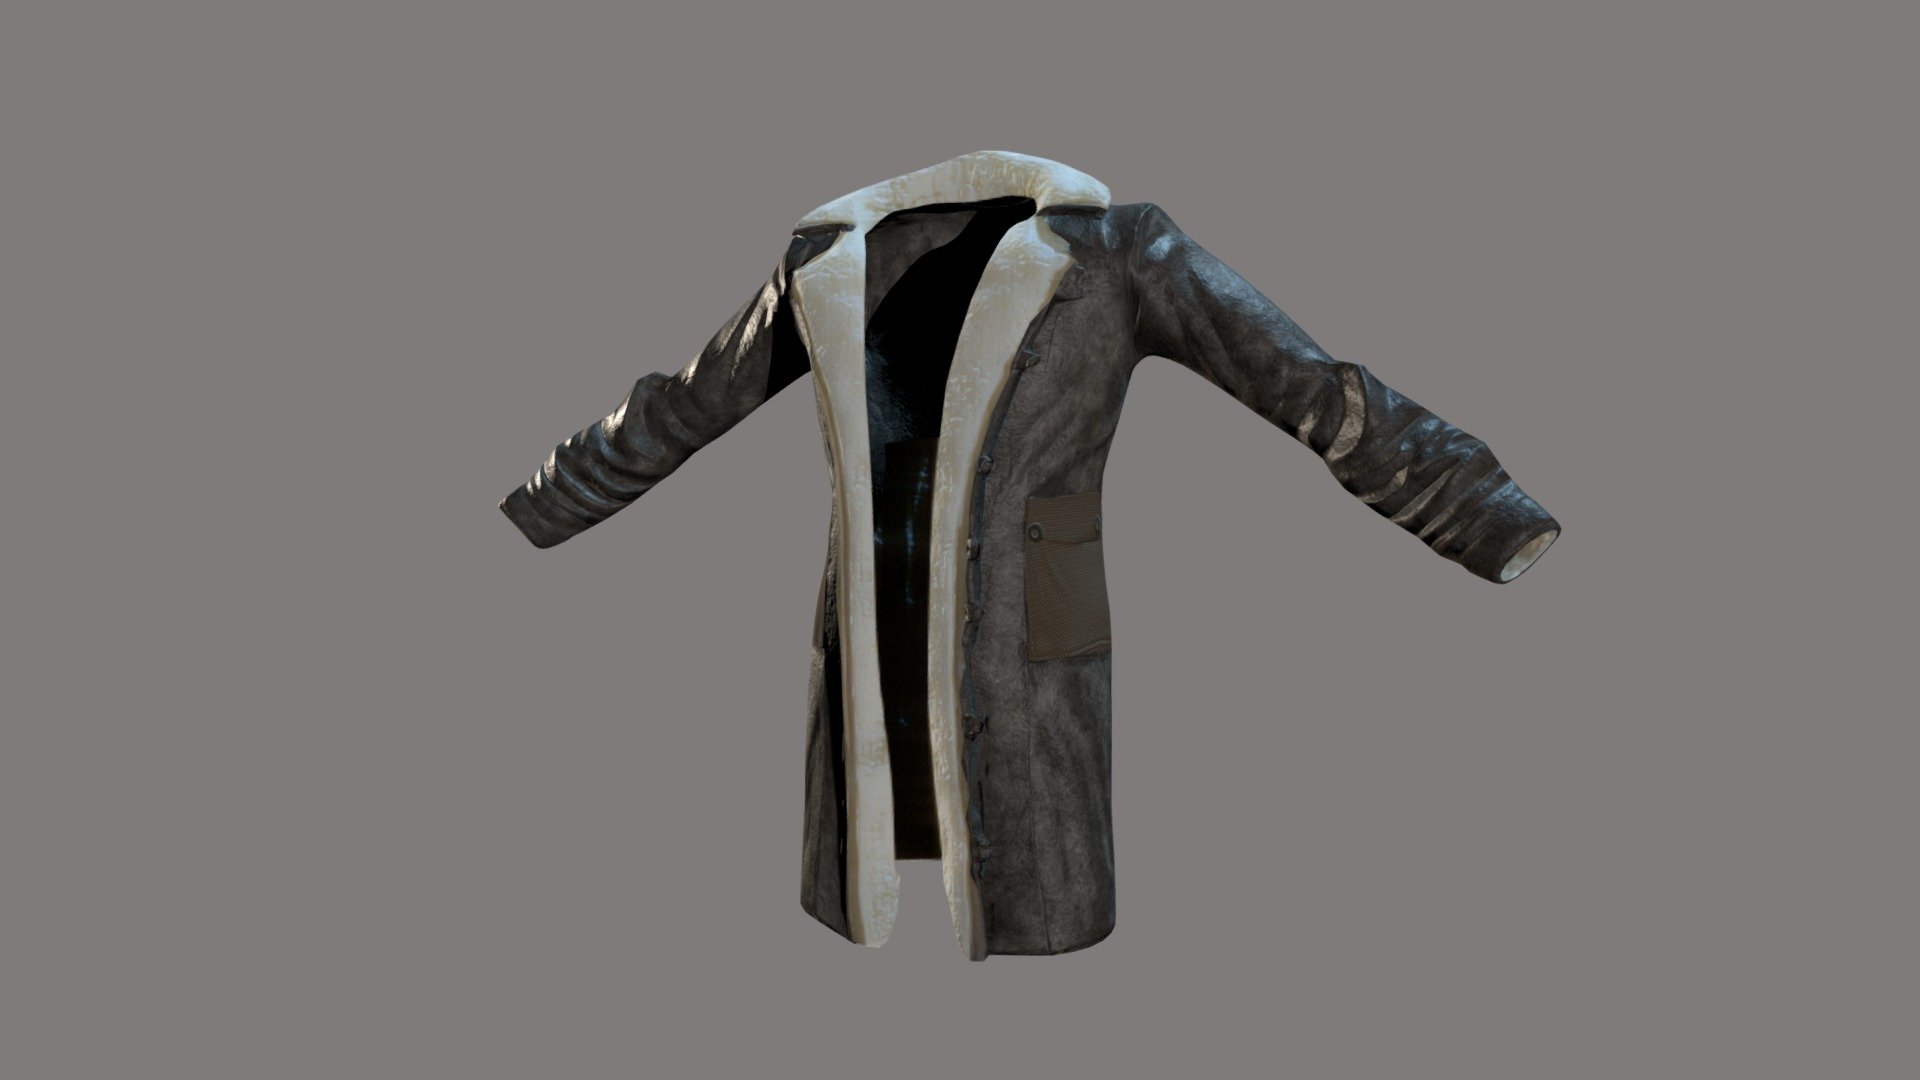 This is a jacket that I modeled based on Bane's jacket from the Dark Knight Rises 3d model